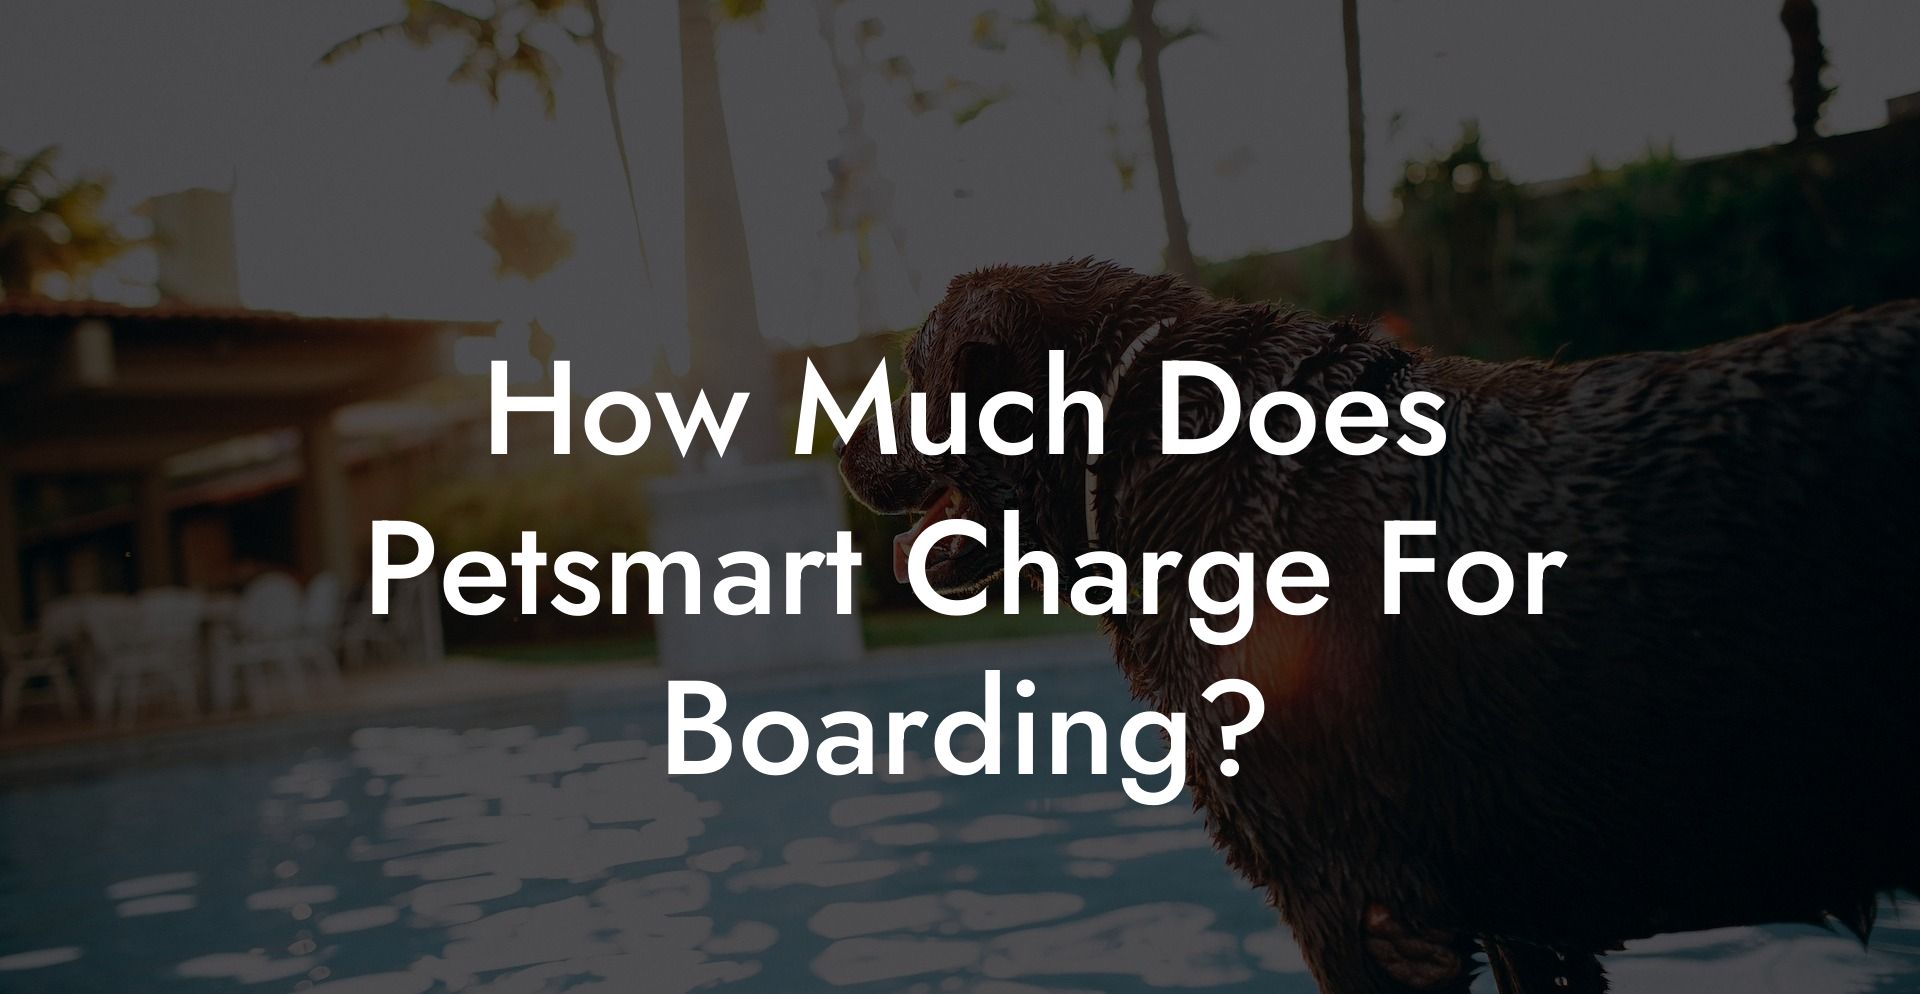 How Much Does Petsmart Charge For Boarding?